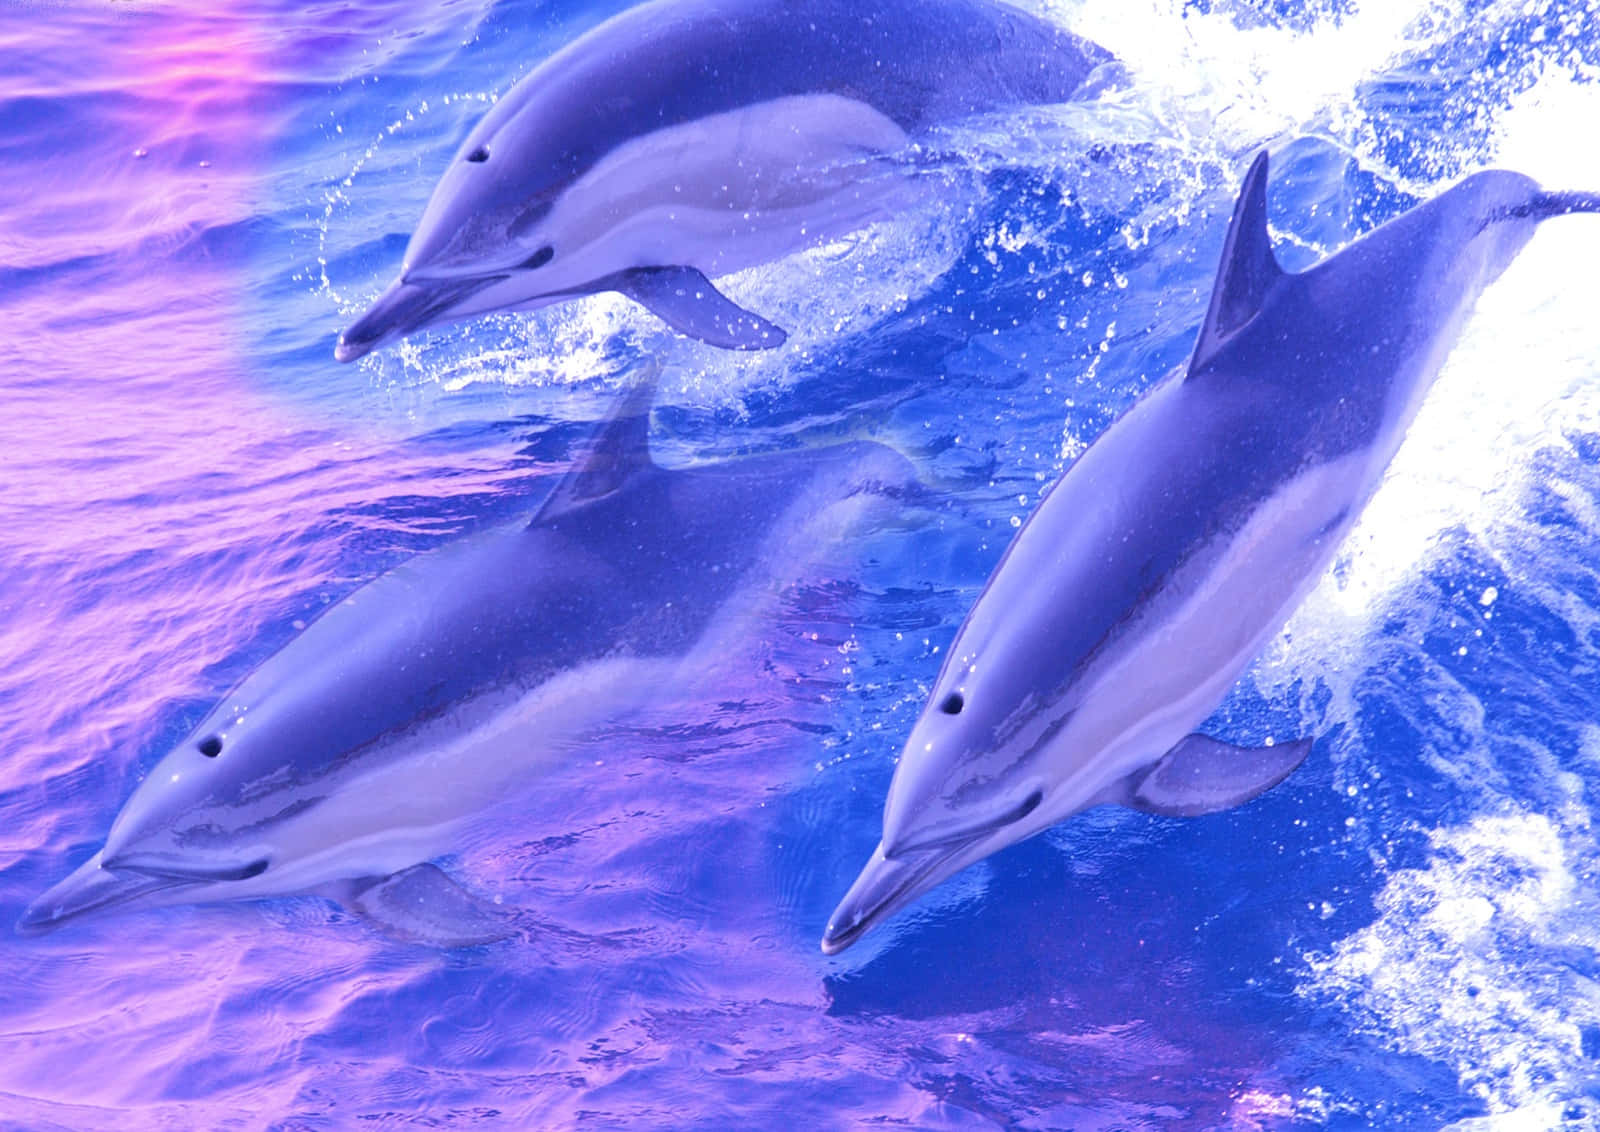 The beauty of nature: dolphins frolicking in the sea